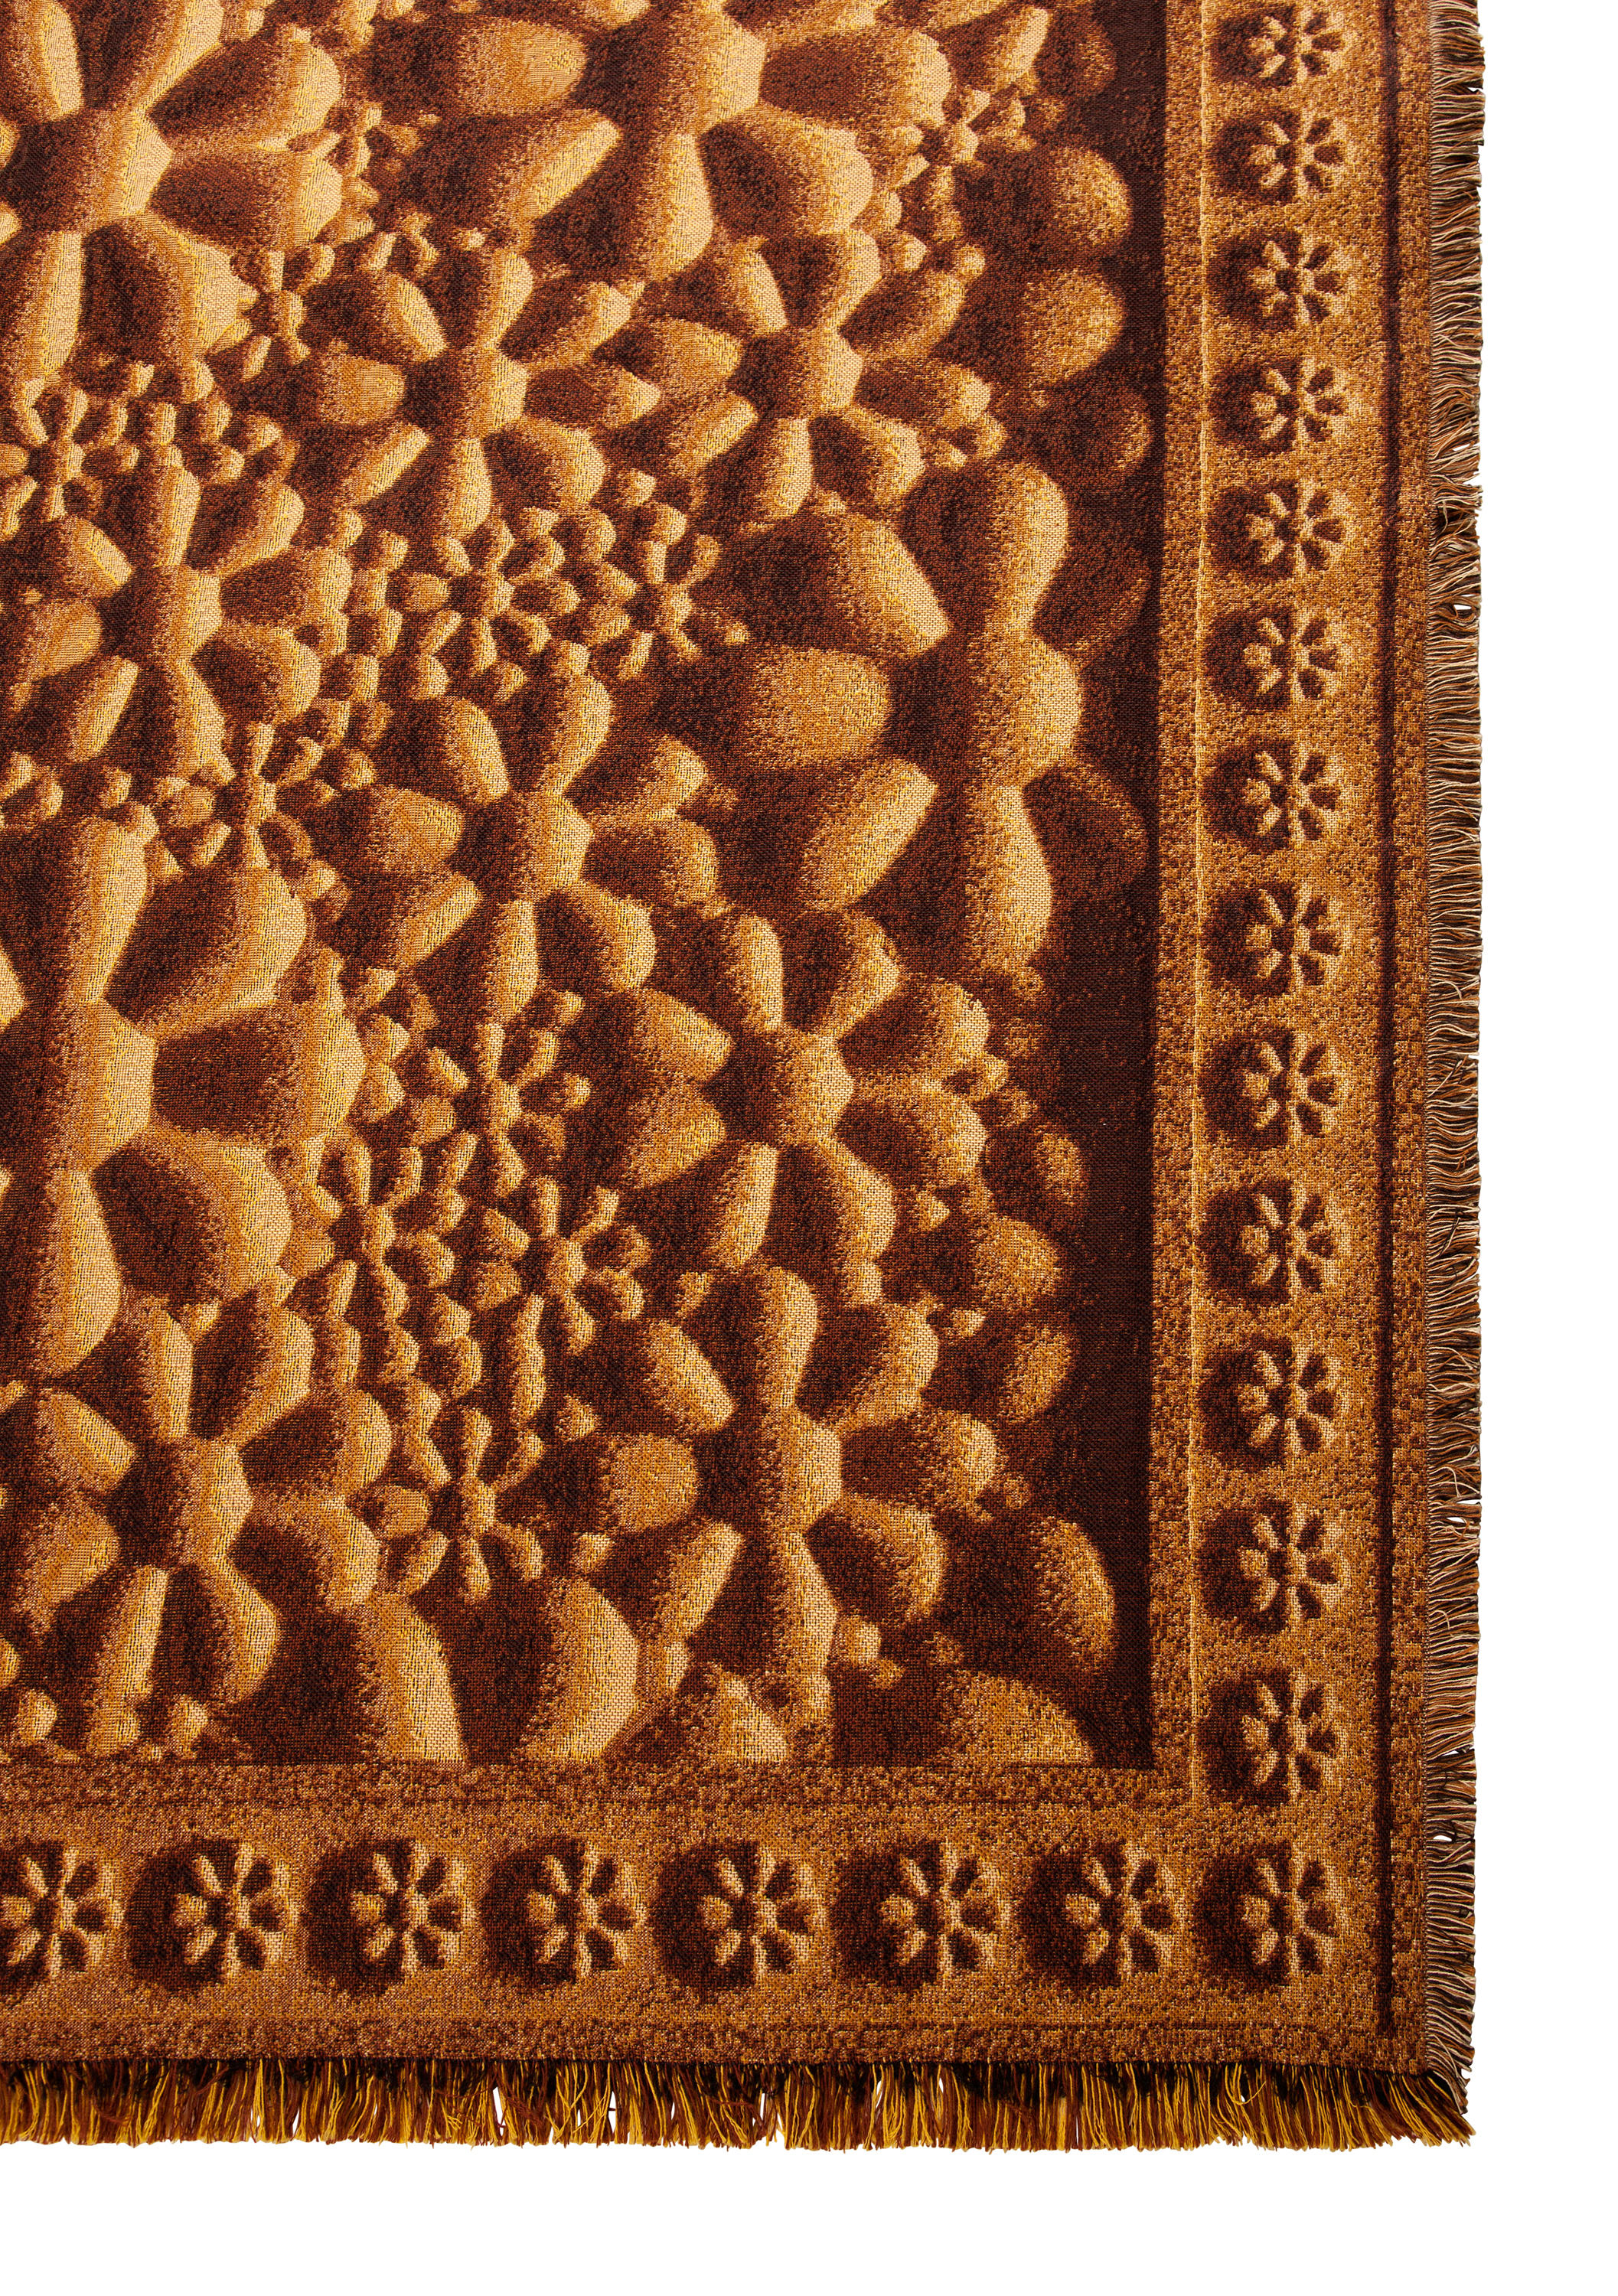 Jacquard Woven Blueberry Field Rug Architonic